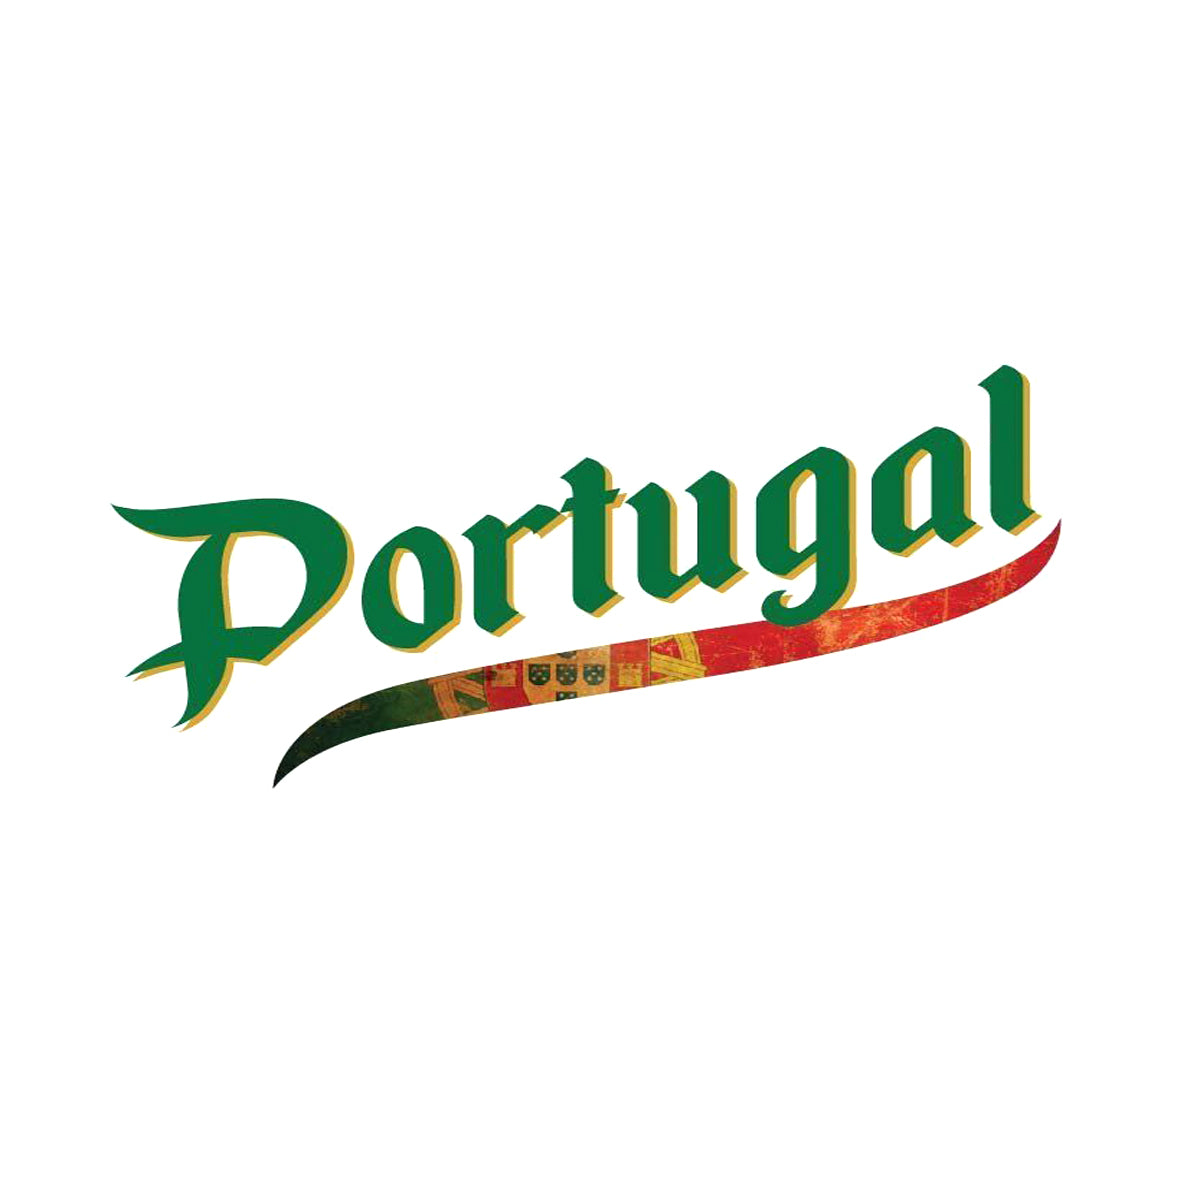 Portugal Script World Cup 2022 Printed Tee T-shirts 411 